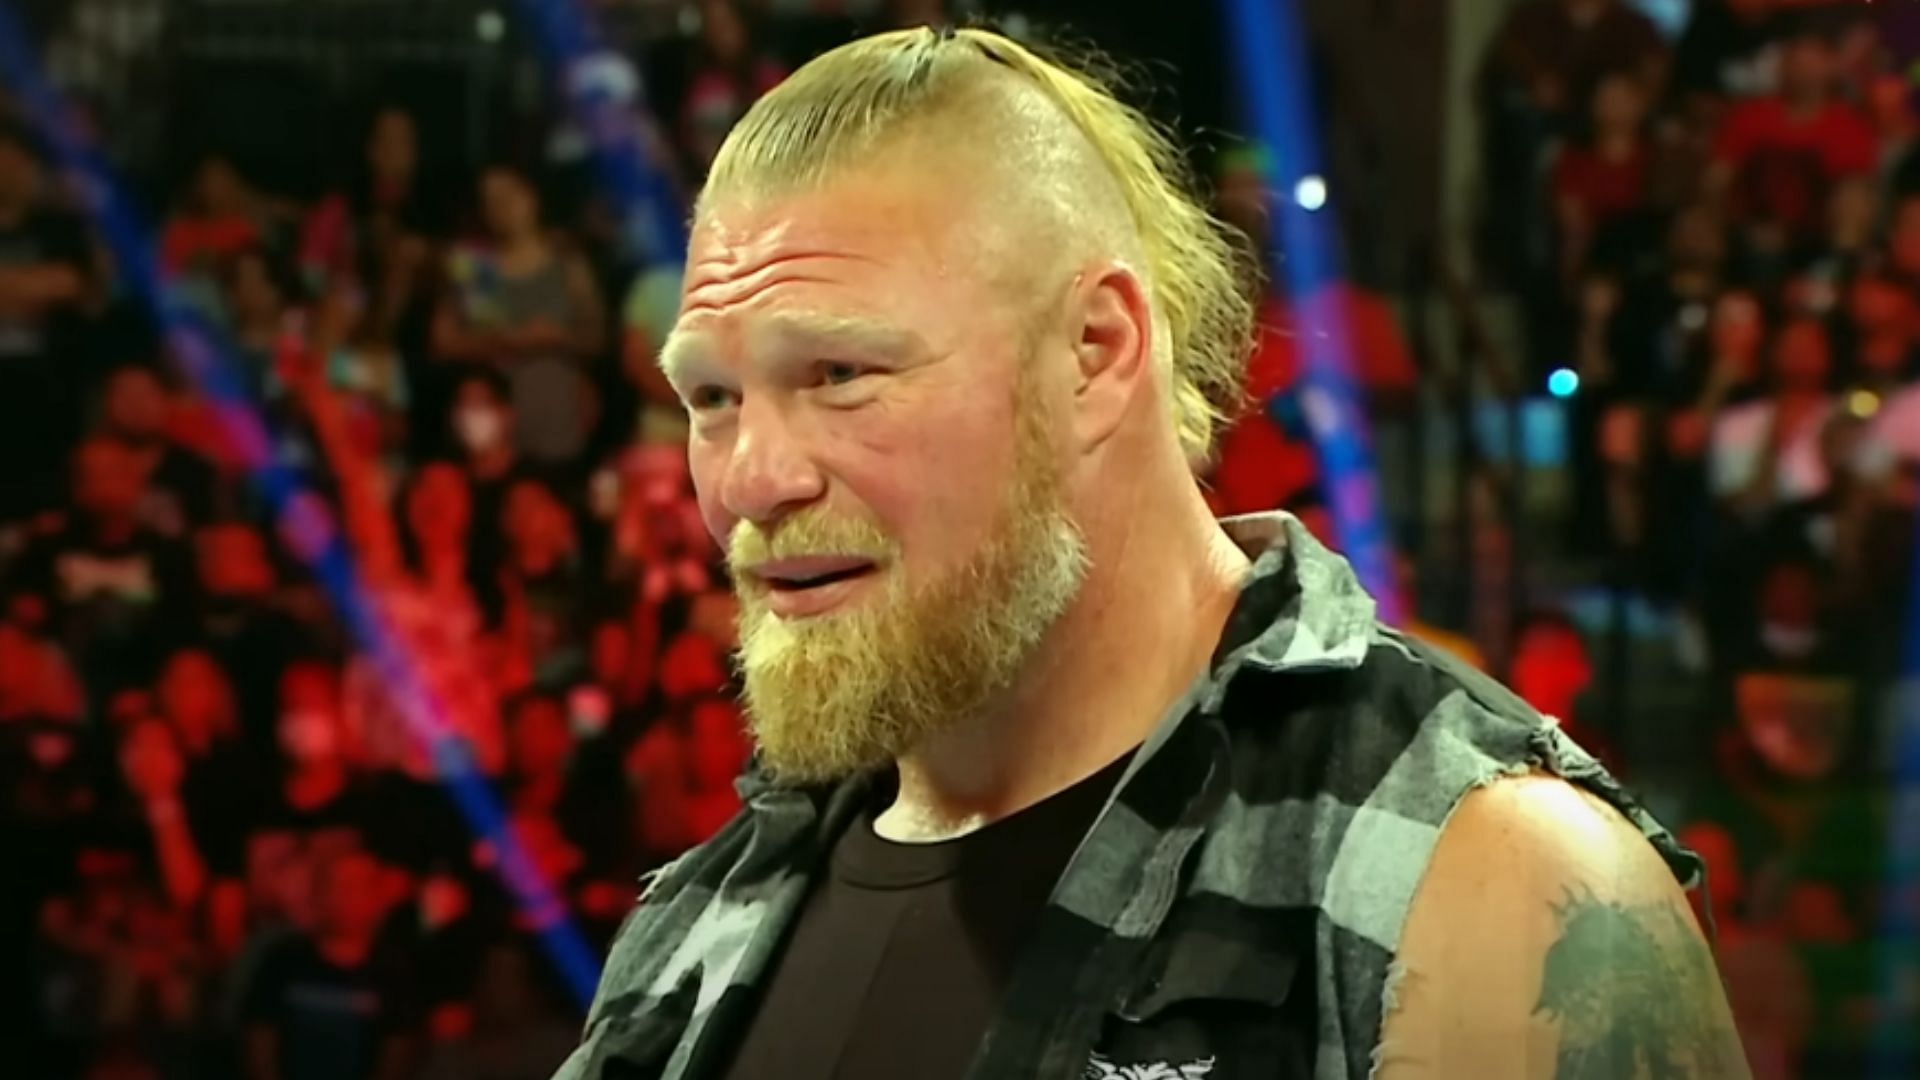 Brock Lesnar was not impressed with WWE Superstar until recently, according to Paul Heyman